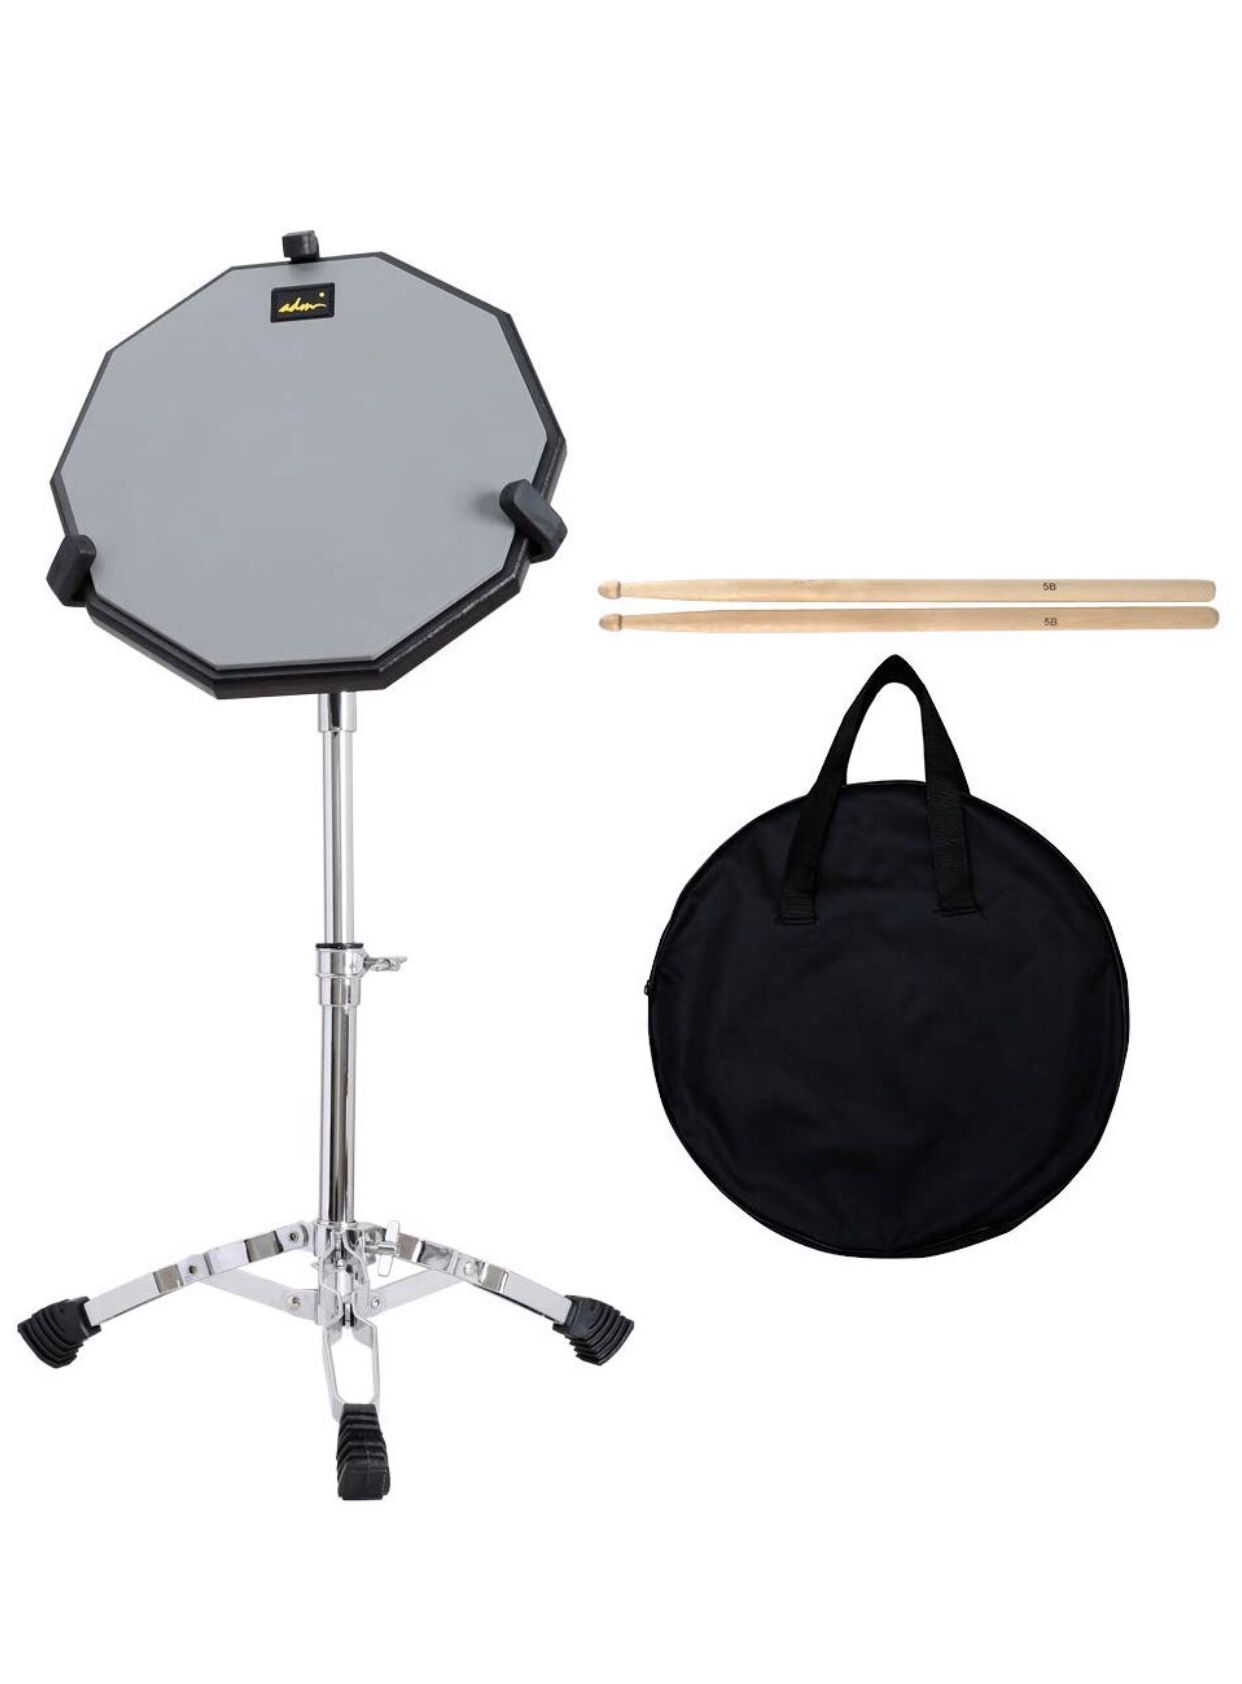 ADM 12" Silent Snare Drum Practice Pad Percussion Set Double Sides Buddle with Stand Sticks Bag, Silver (Silver)